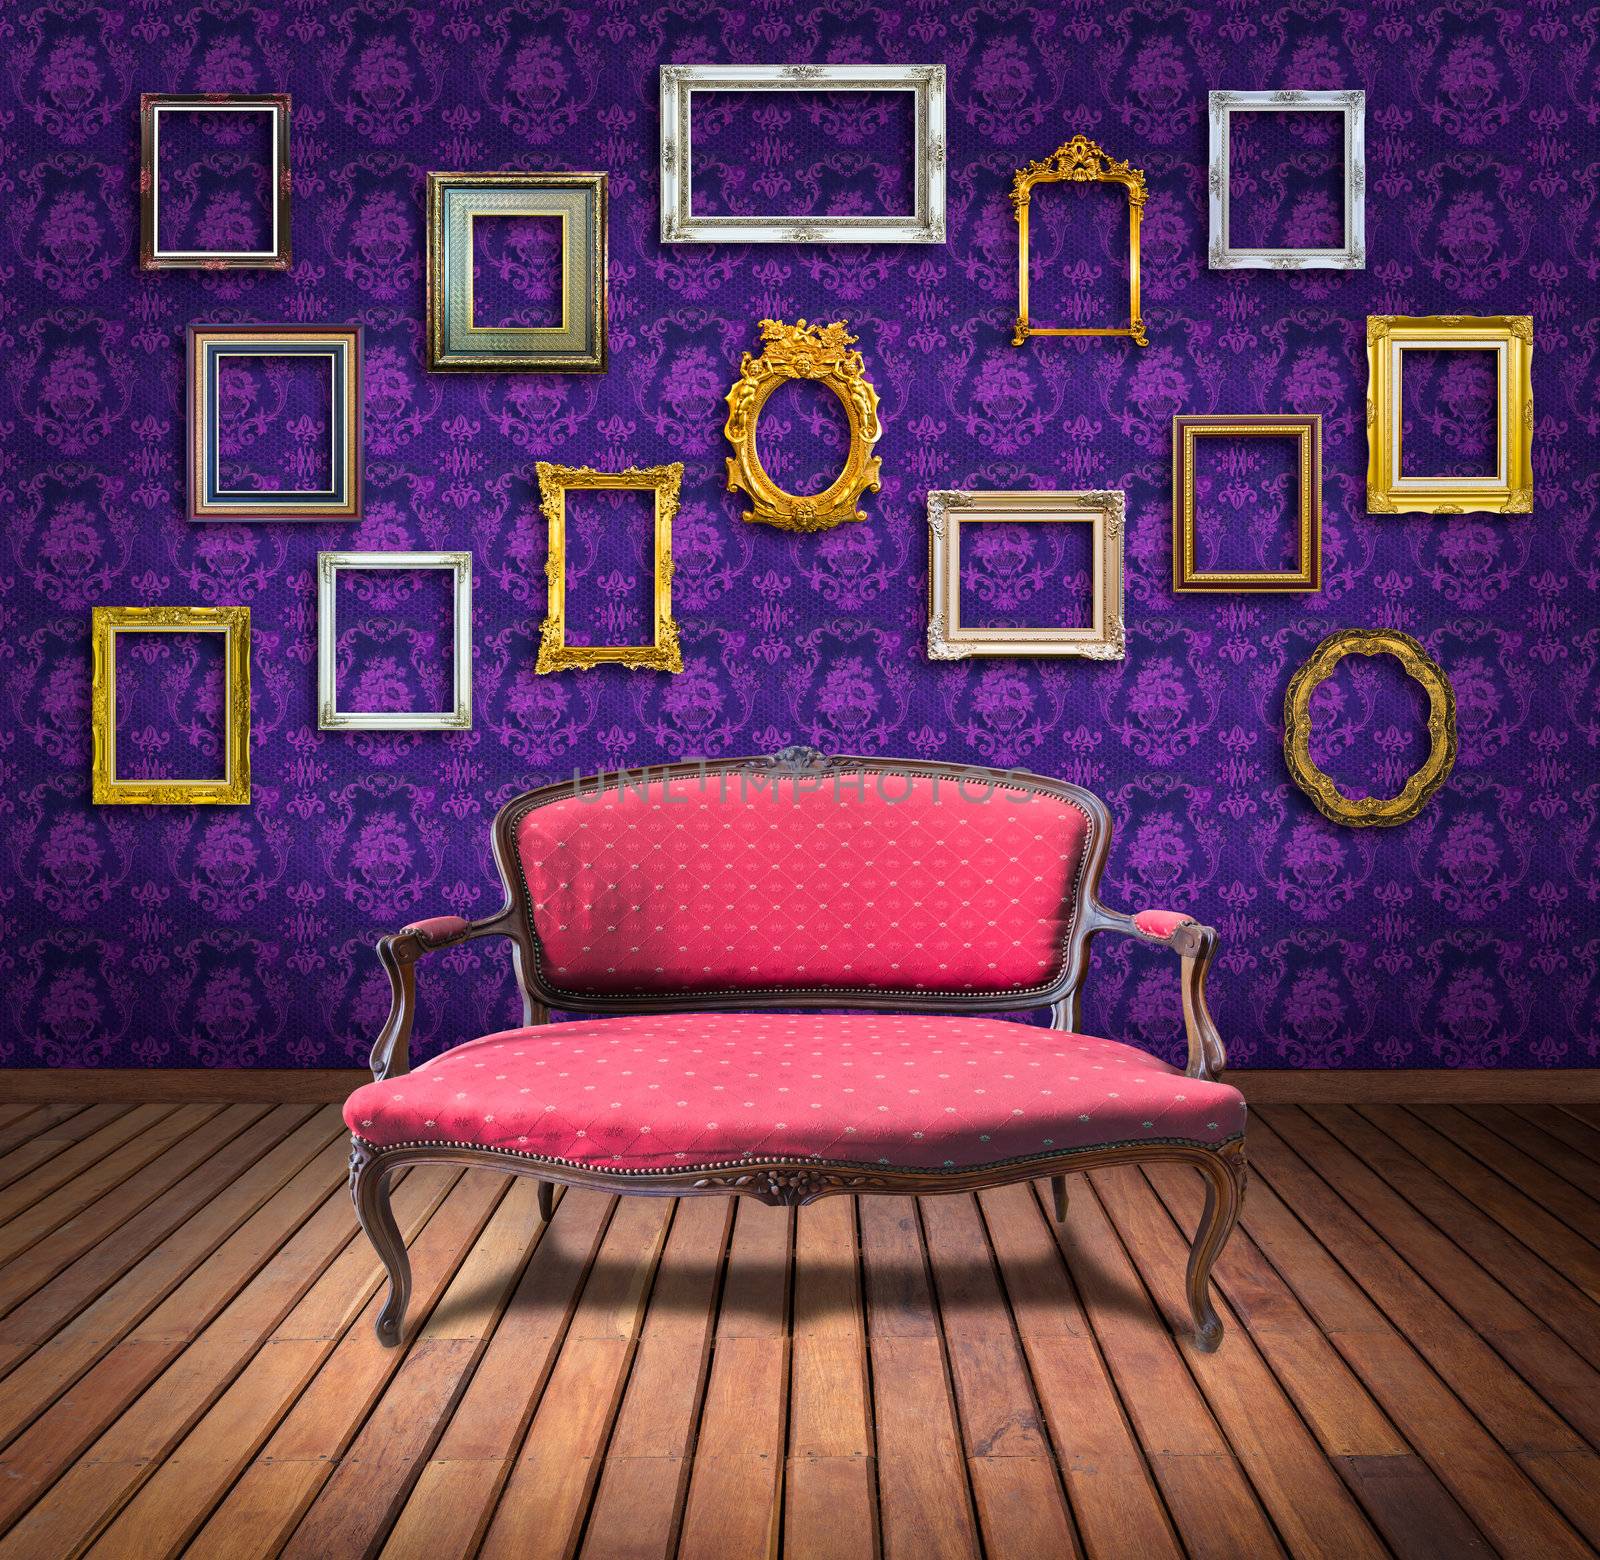 vintage luxury armchair and frame in purple wallpaper room by tungphoto